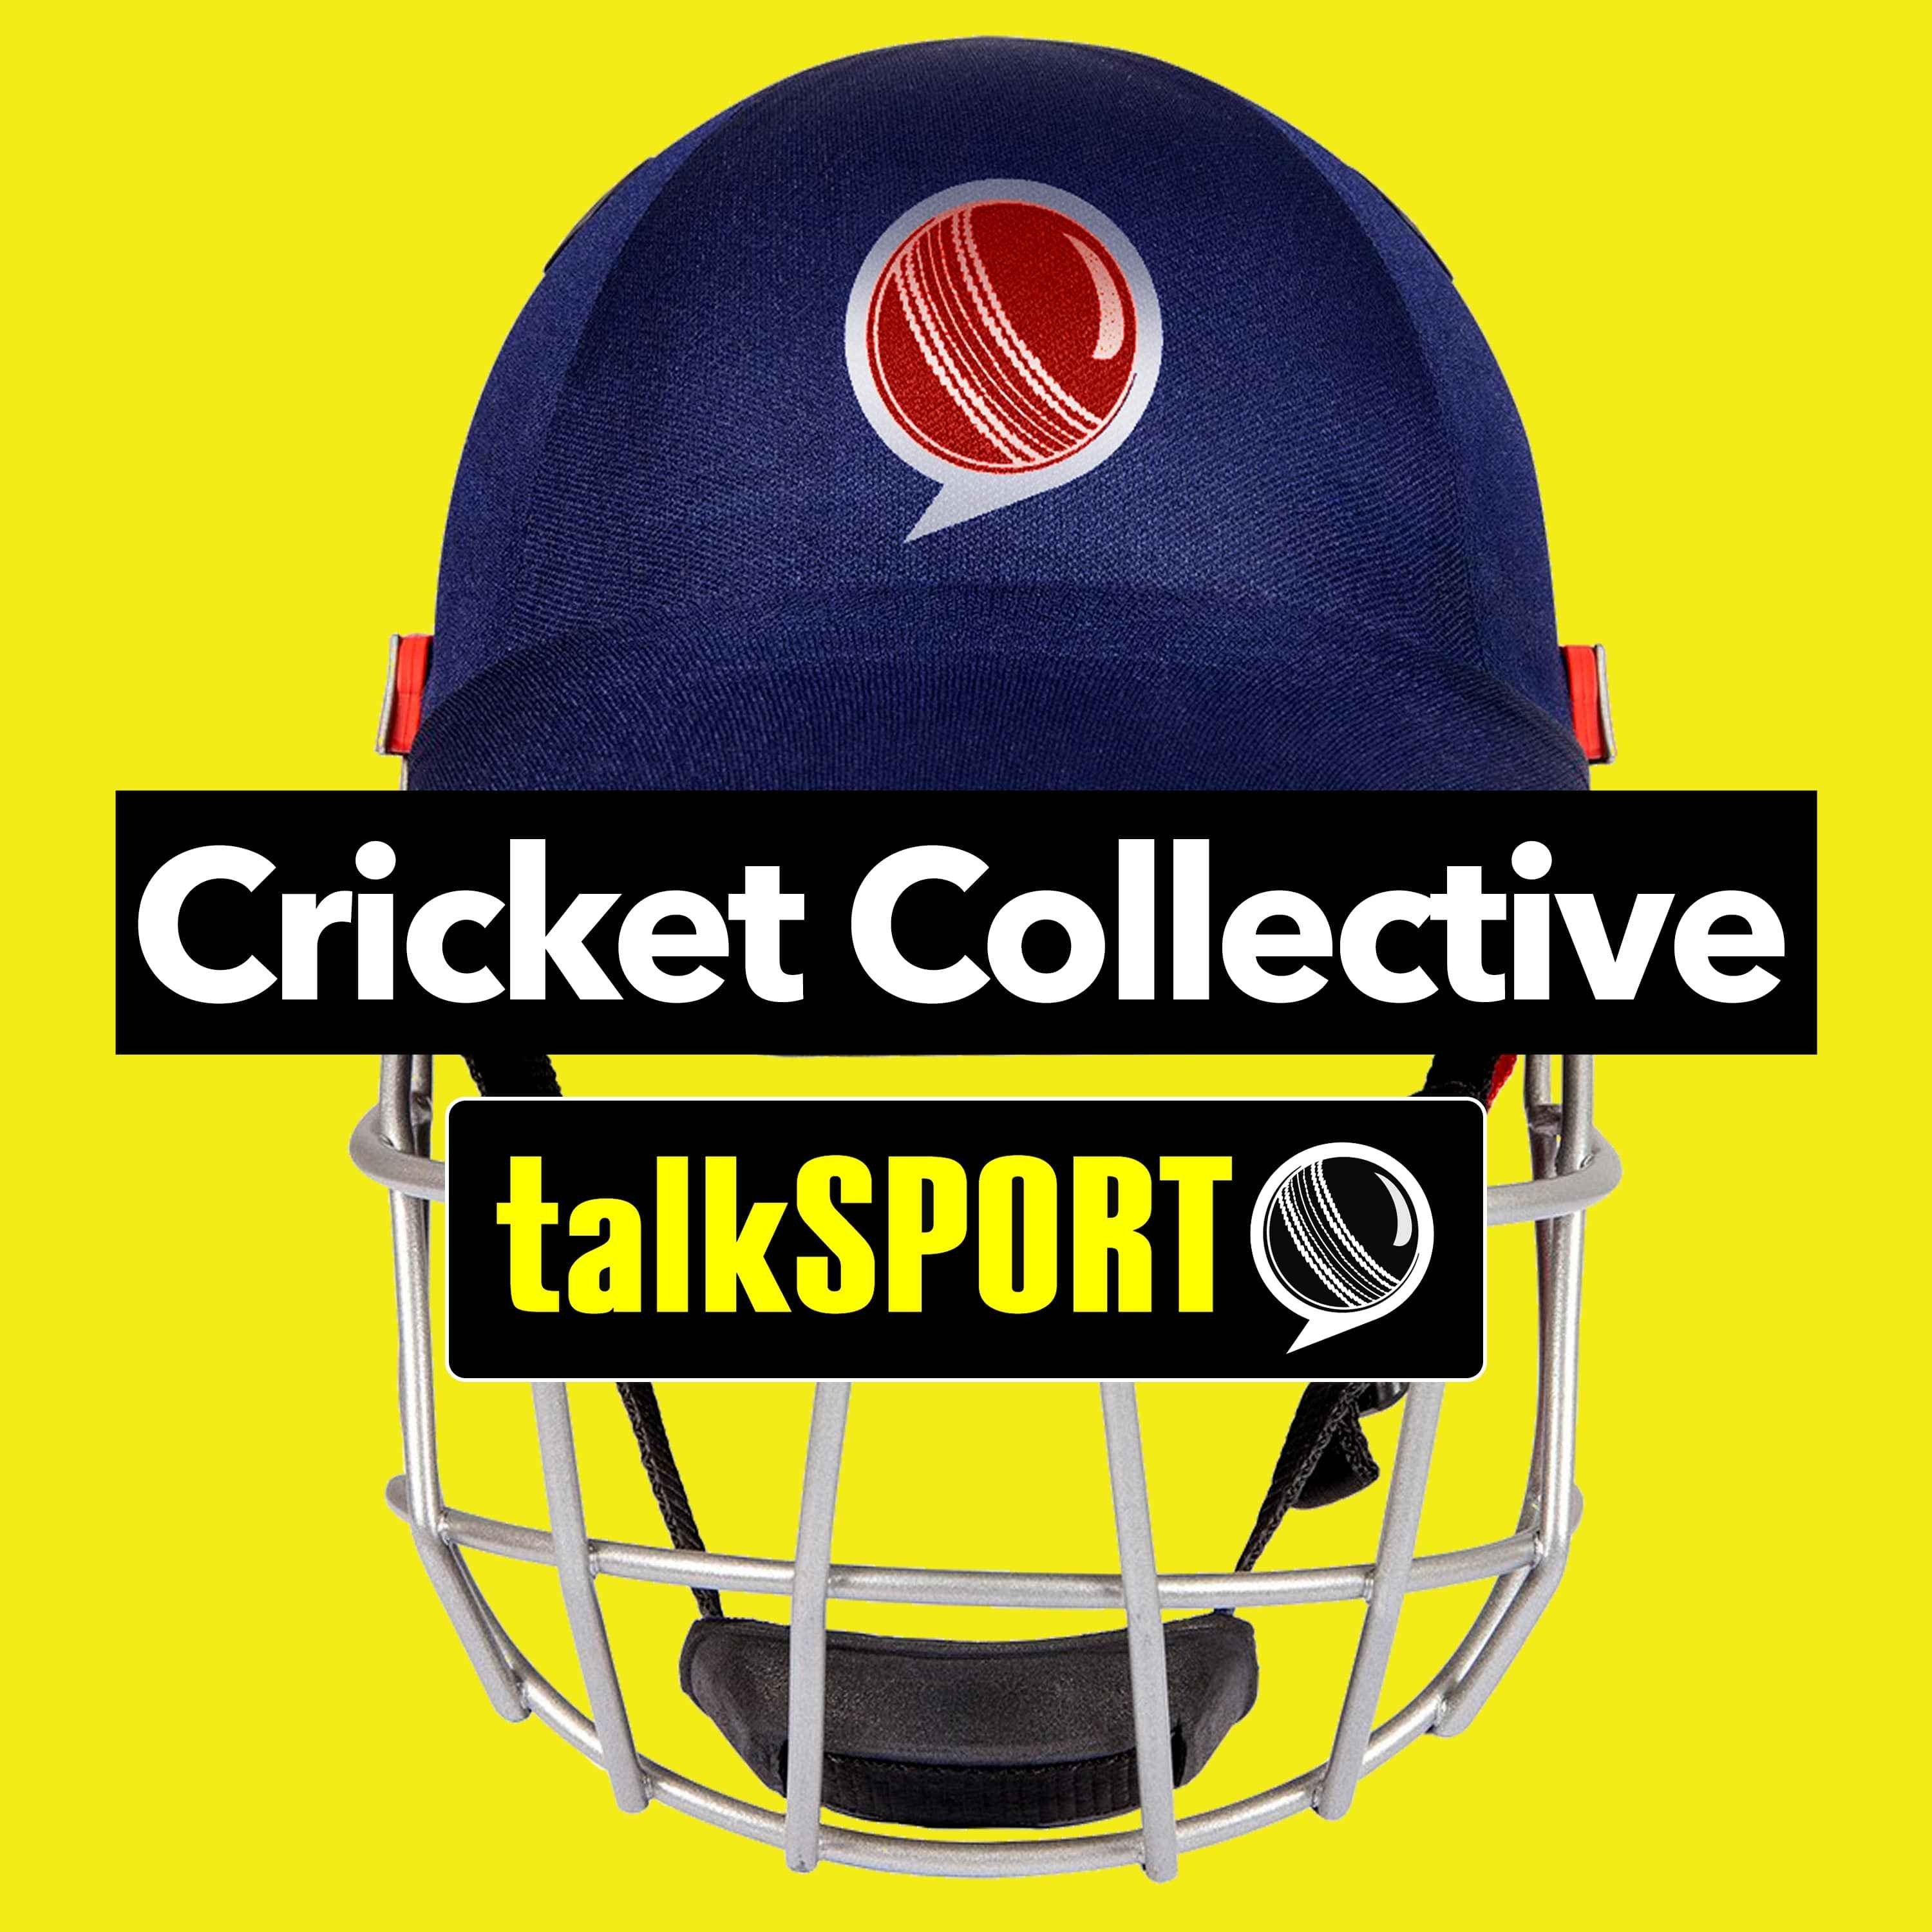 The Cricket Collective - Australia Win The Cricket World Cup & Freddie Flintoff Lands Coaching Job